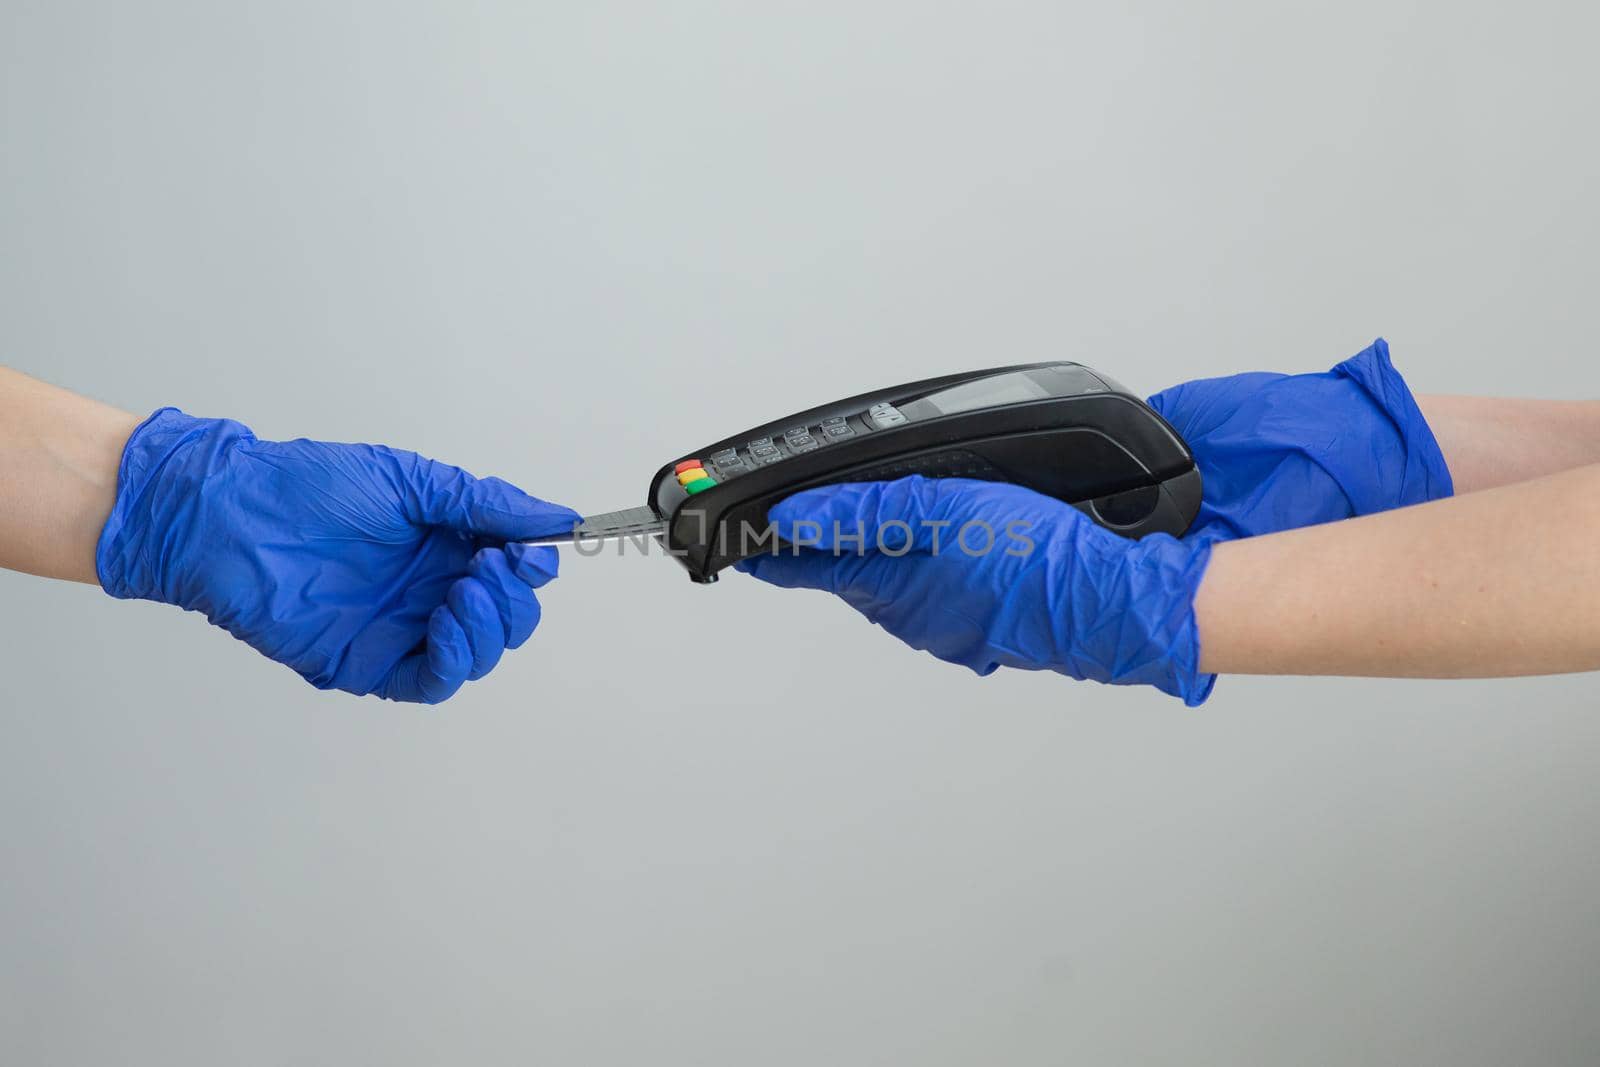 Female holding in hands wireless modern bank payment terminal to process acquire credit card payments black card isolated on grey background. Hands hygiene prevention of coronavirus outbreak.